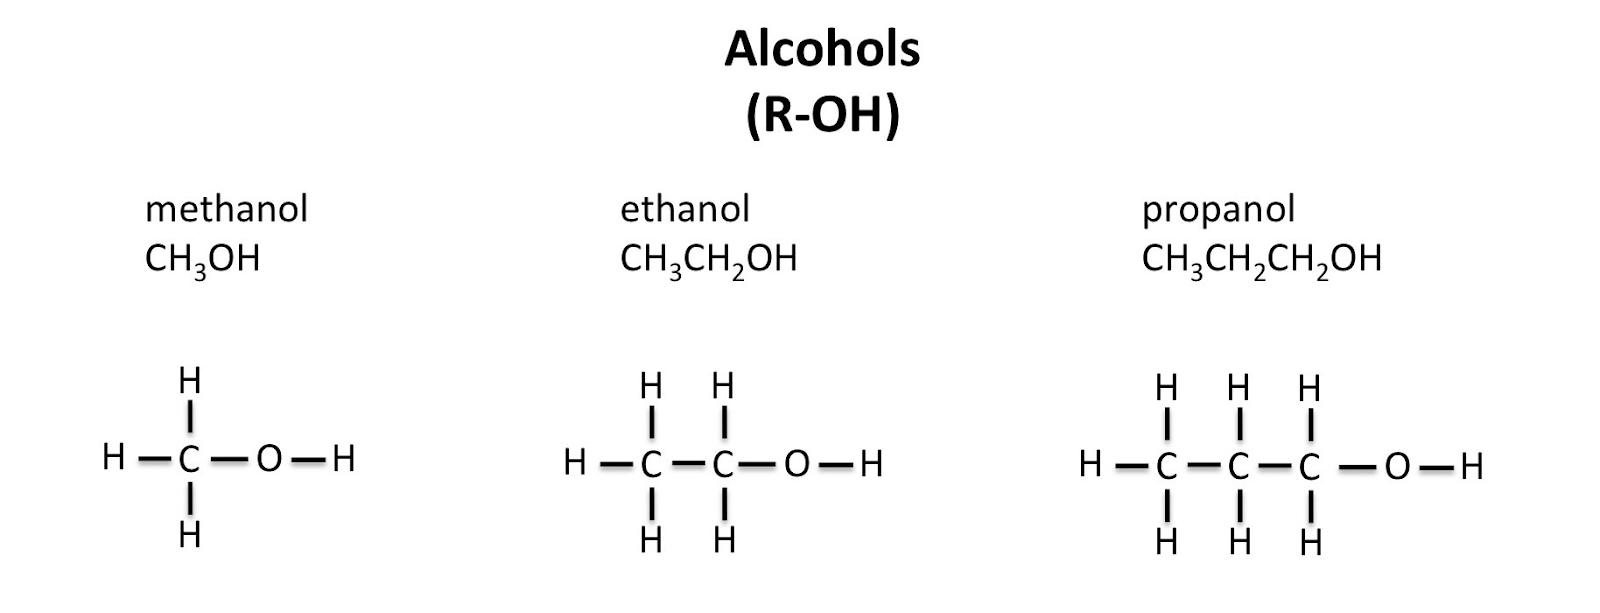 Alcohols and Carboxylic Acids